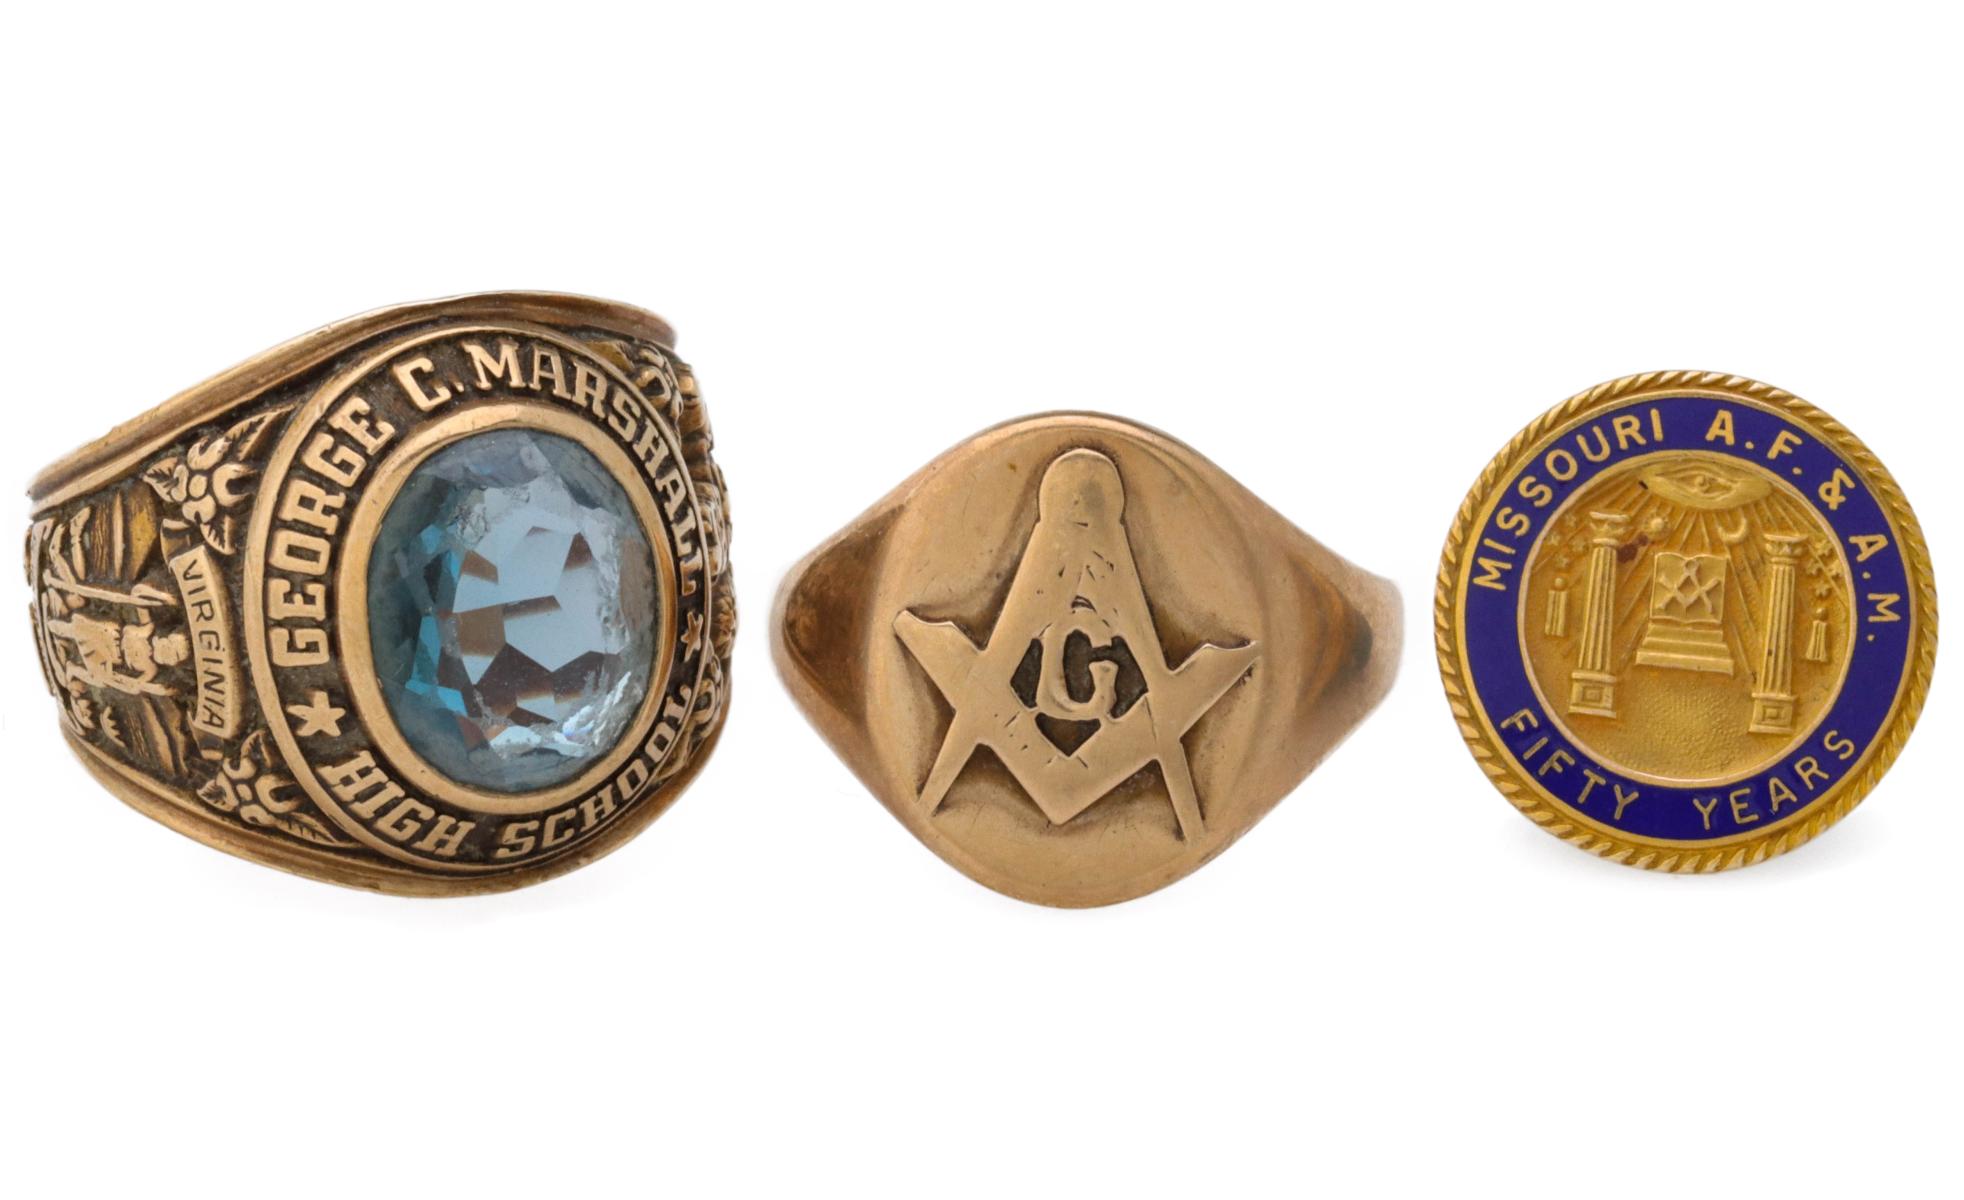 A 10K GOLD CLASS RING AND MASON'S LODGE JEWELRY